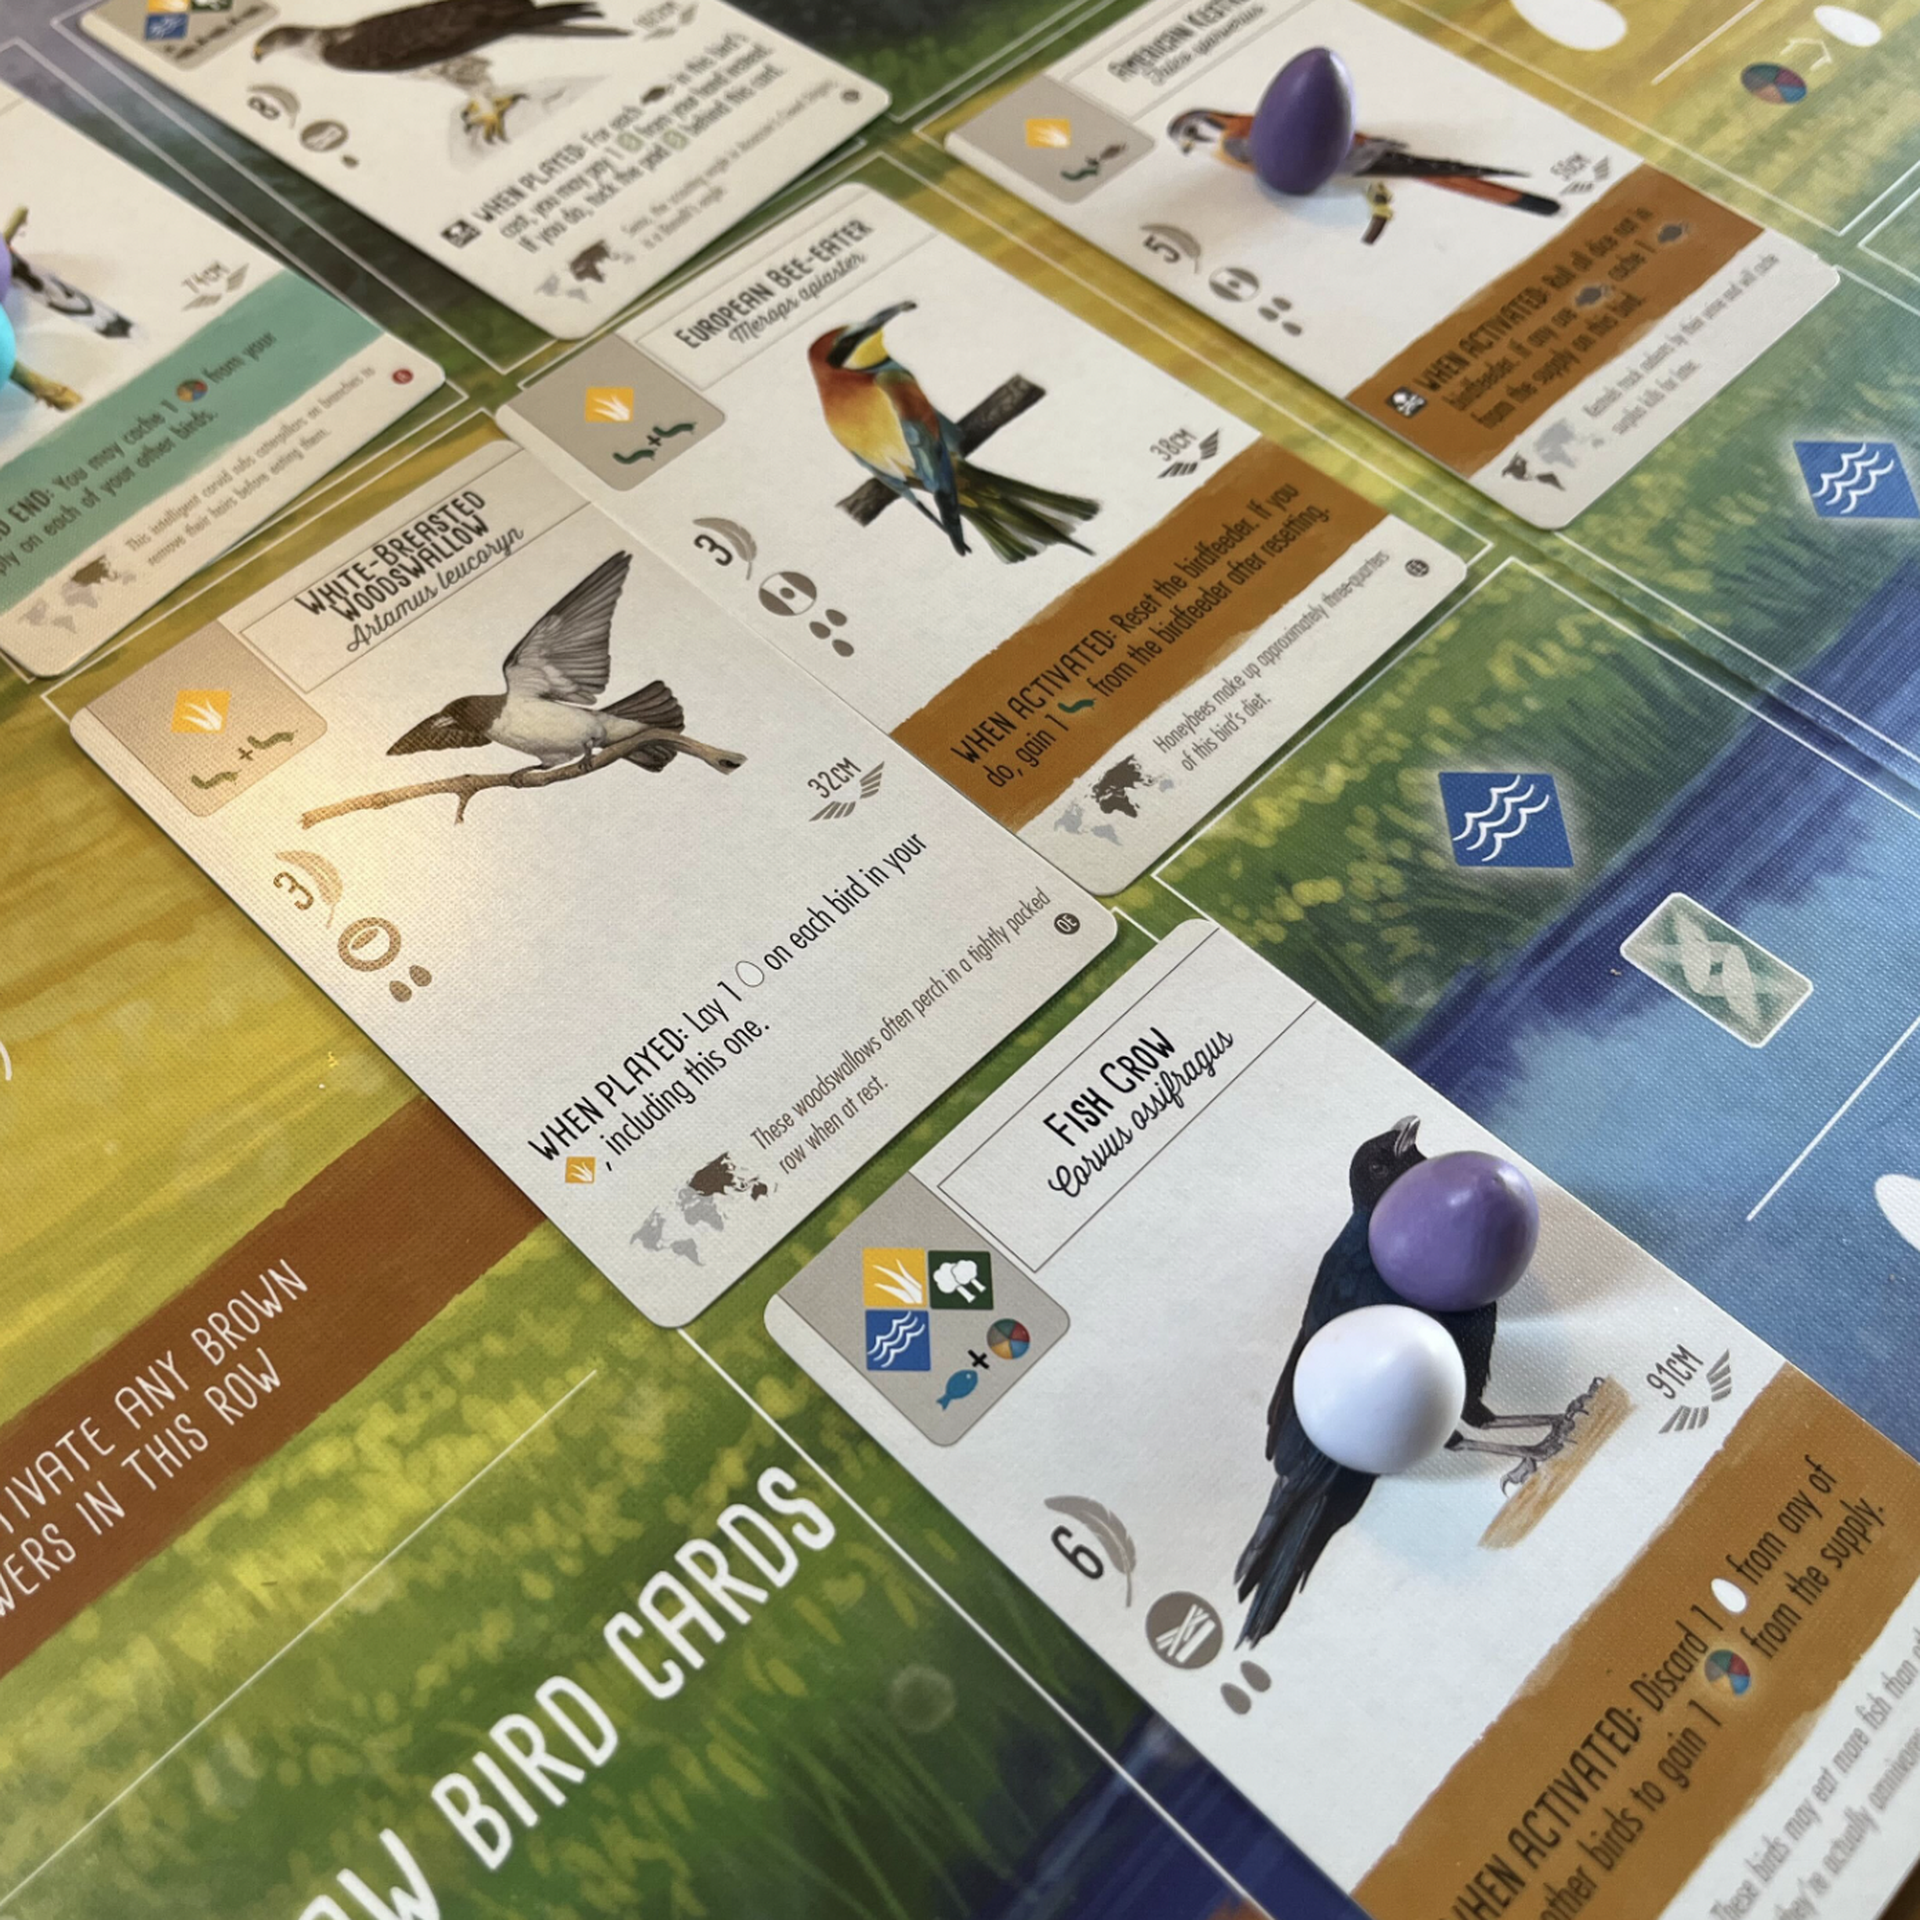 Best board games: Wingspan, designed by a D.C.-area local, is